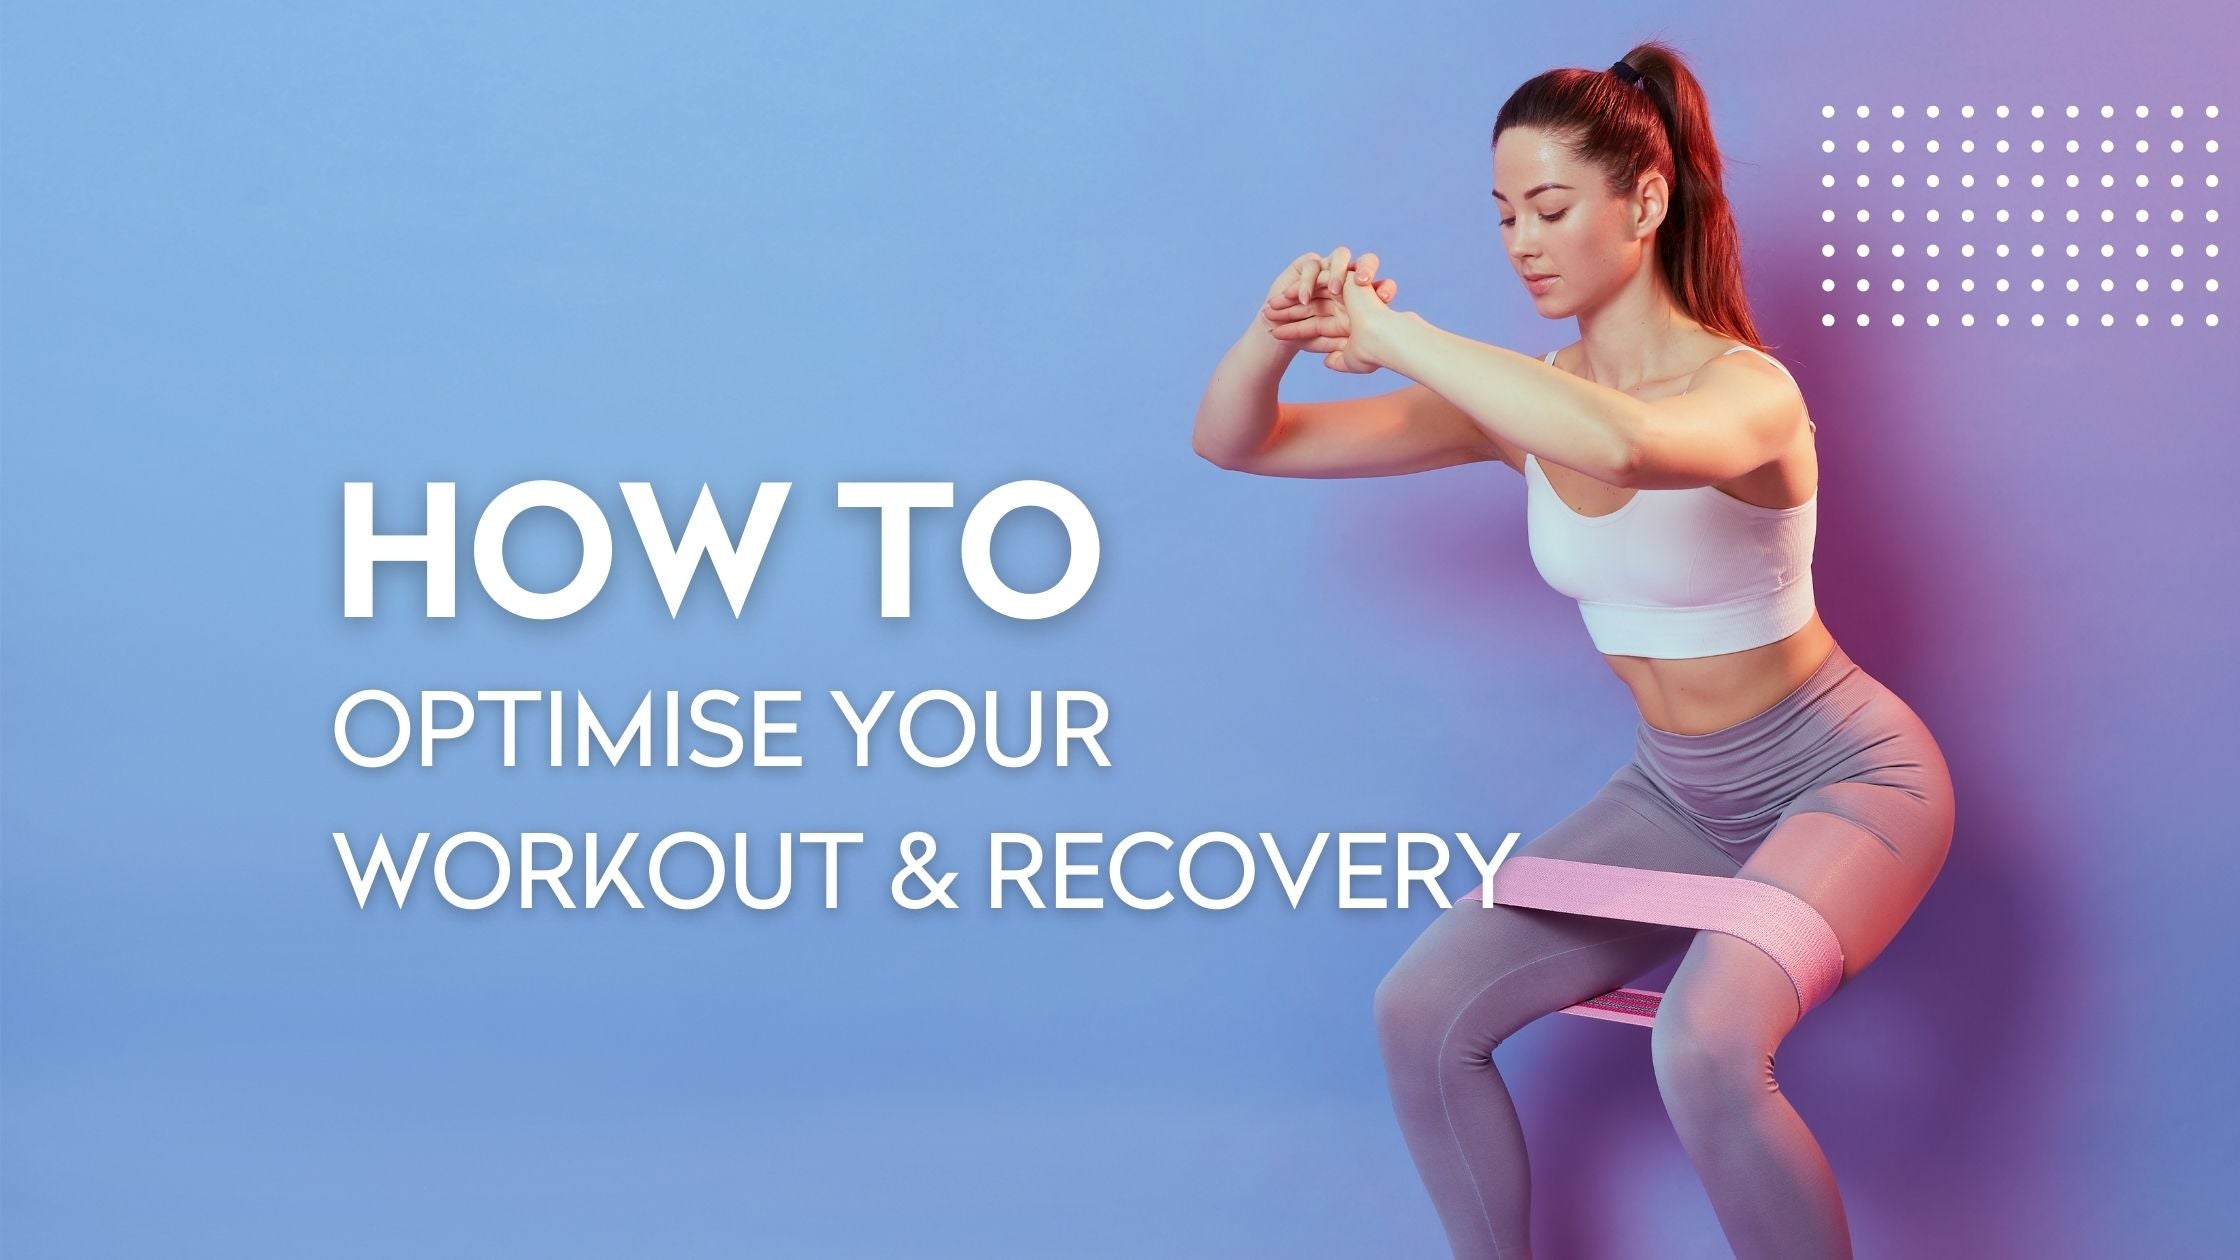 Optimise your workout and recovery with collagen